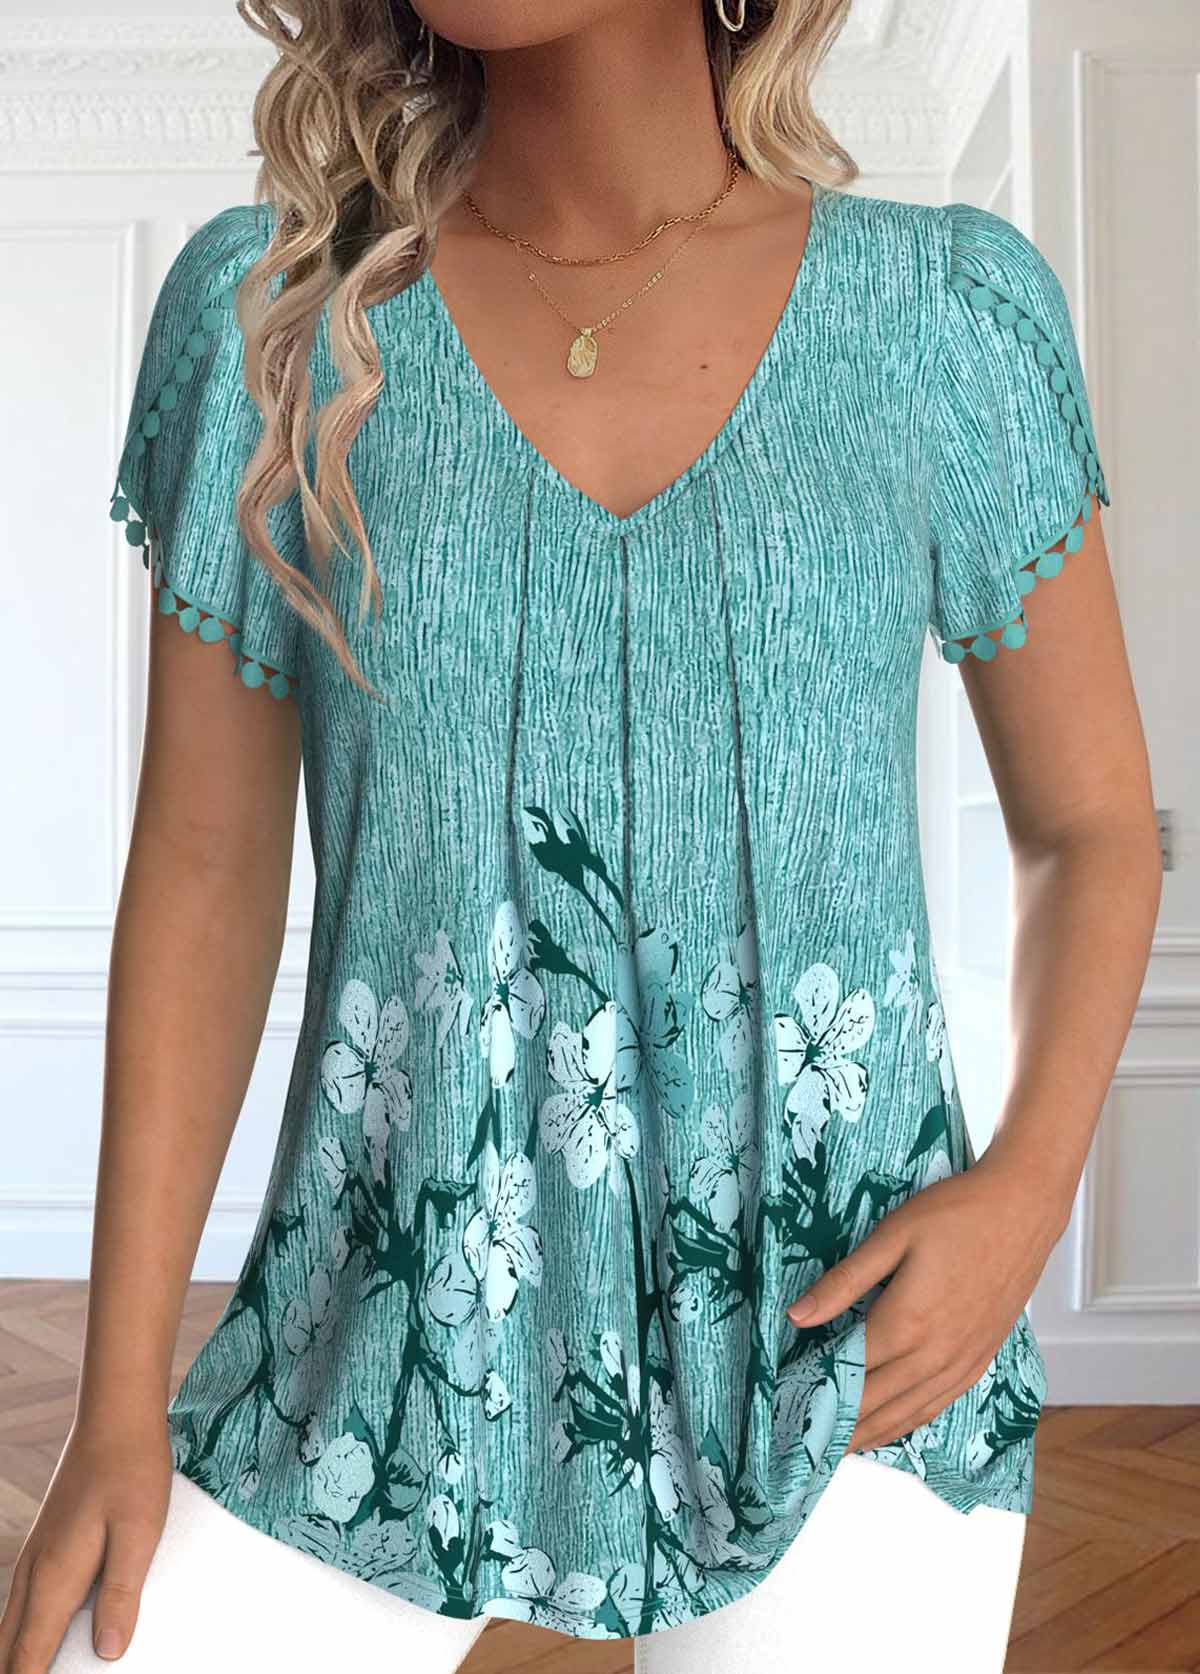 Floral Print Embroidery Mint Green Short Sleeve T Shirt